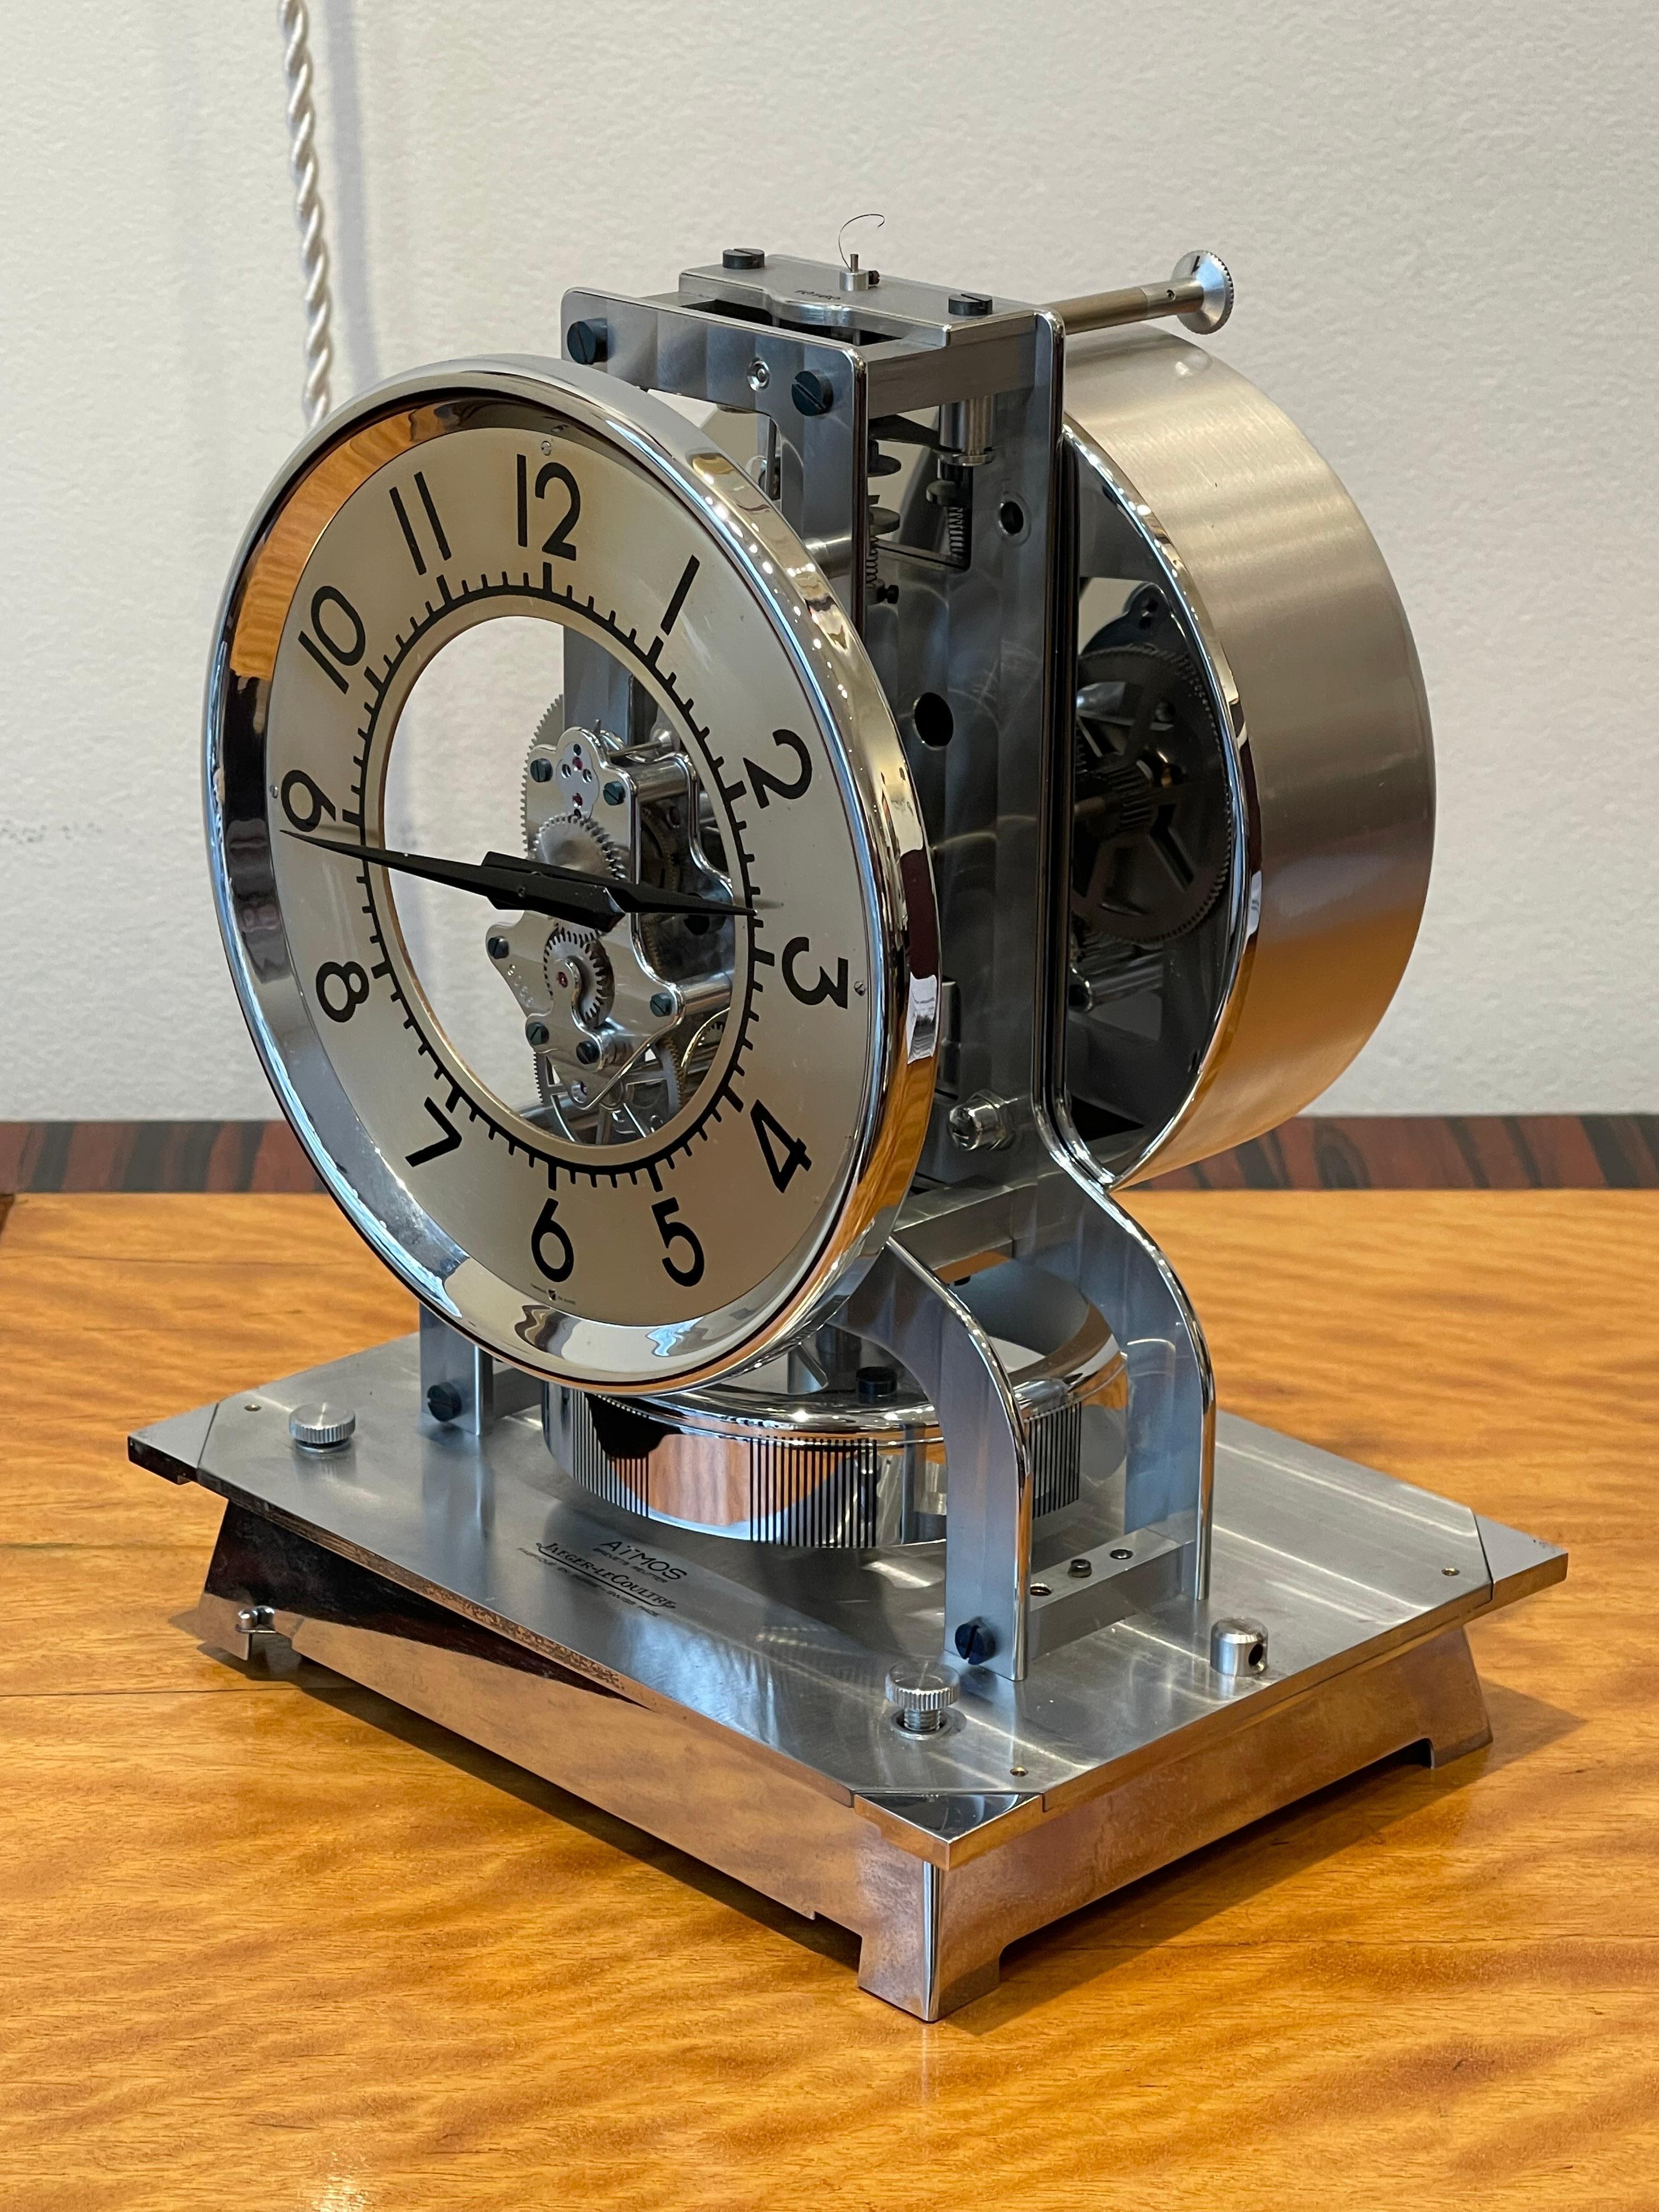 Exceptional  Atmos Table Clock by Jaeger-Lecoultre, circa 1940, Switzerland

Eternal table clock in chrome metal. The clock sits on a chrome metal base, covered by a wooden cube. The dial is hollow in the center with an exposed mechanism, and the